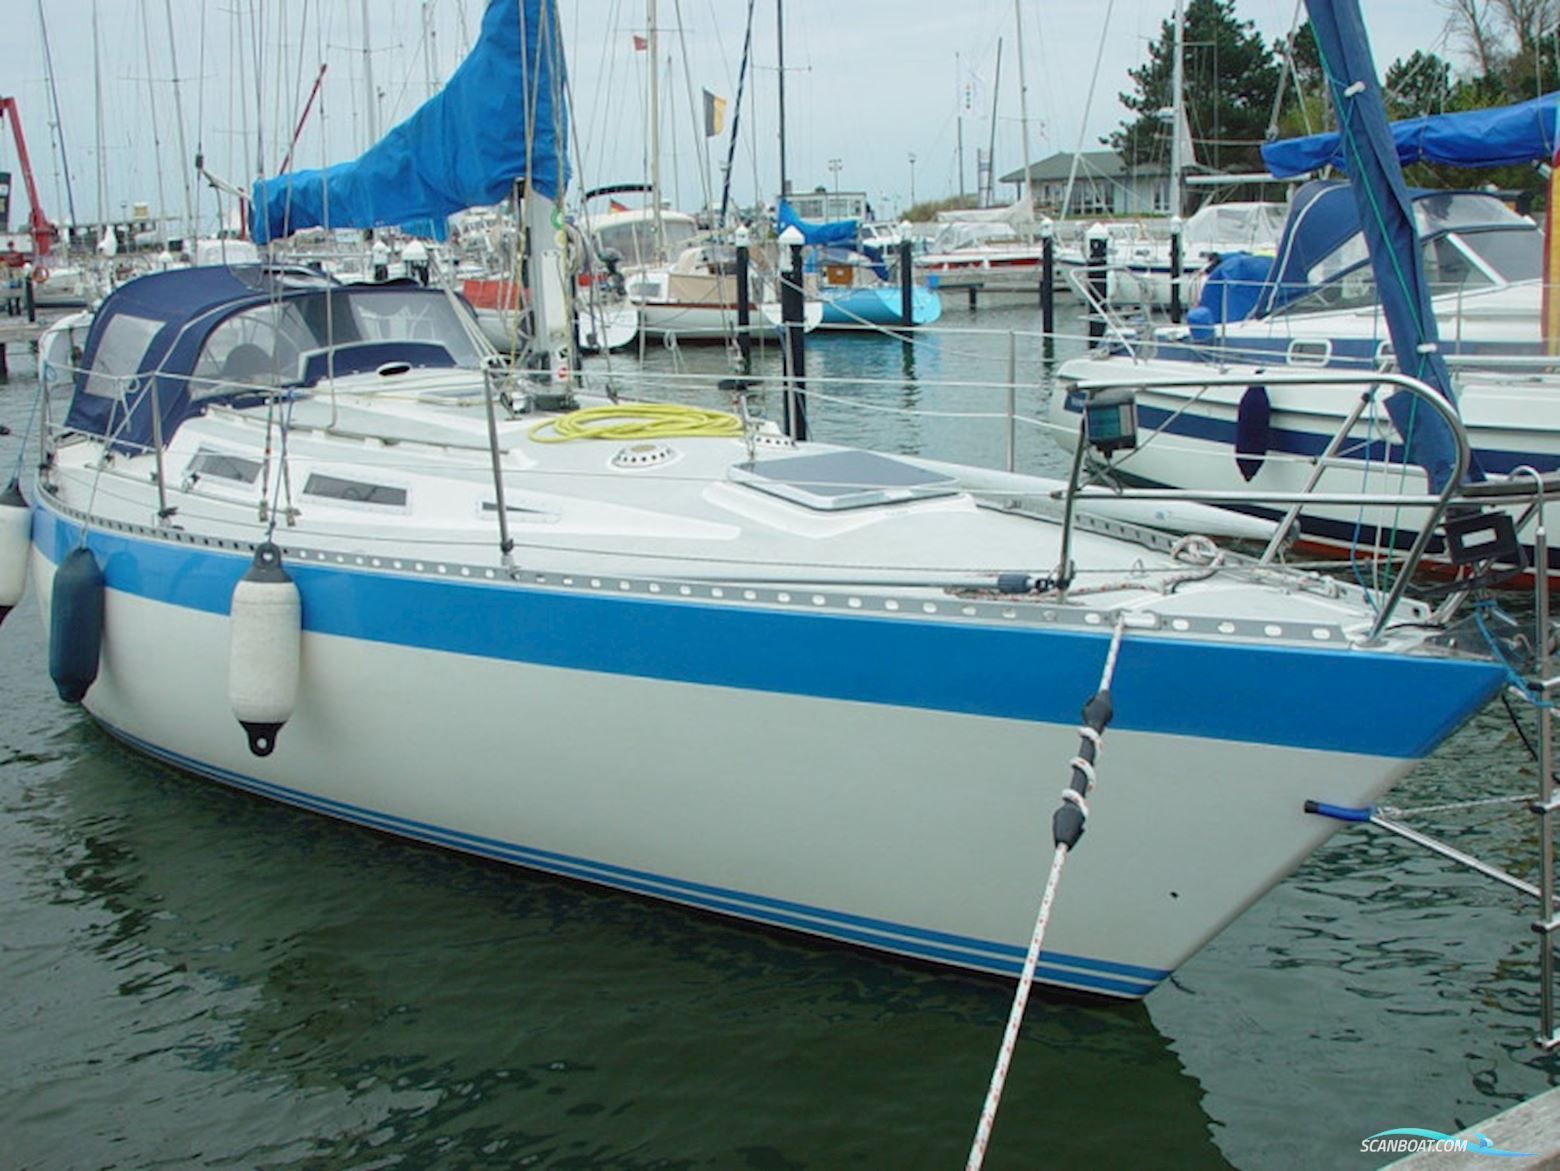 Gladiateur 33 Sailing boat 1981, with Perkins engine, Germany